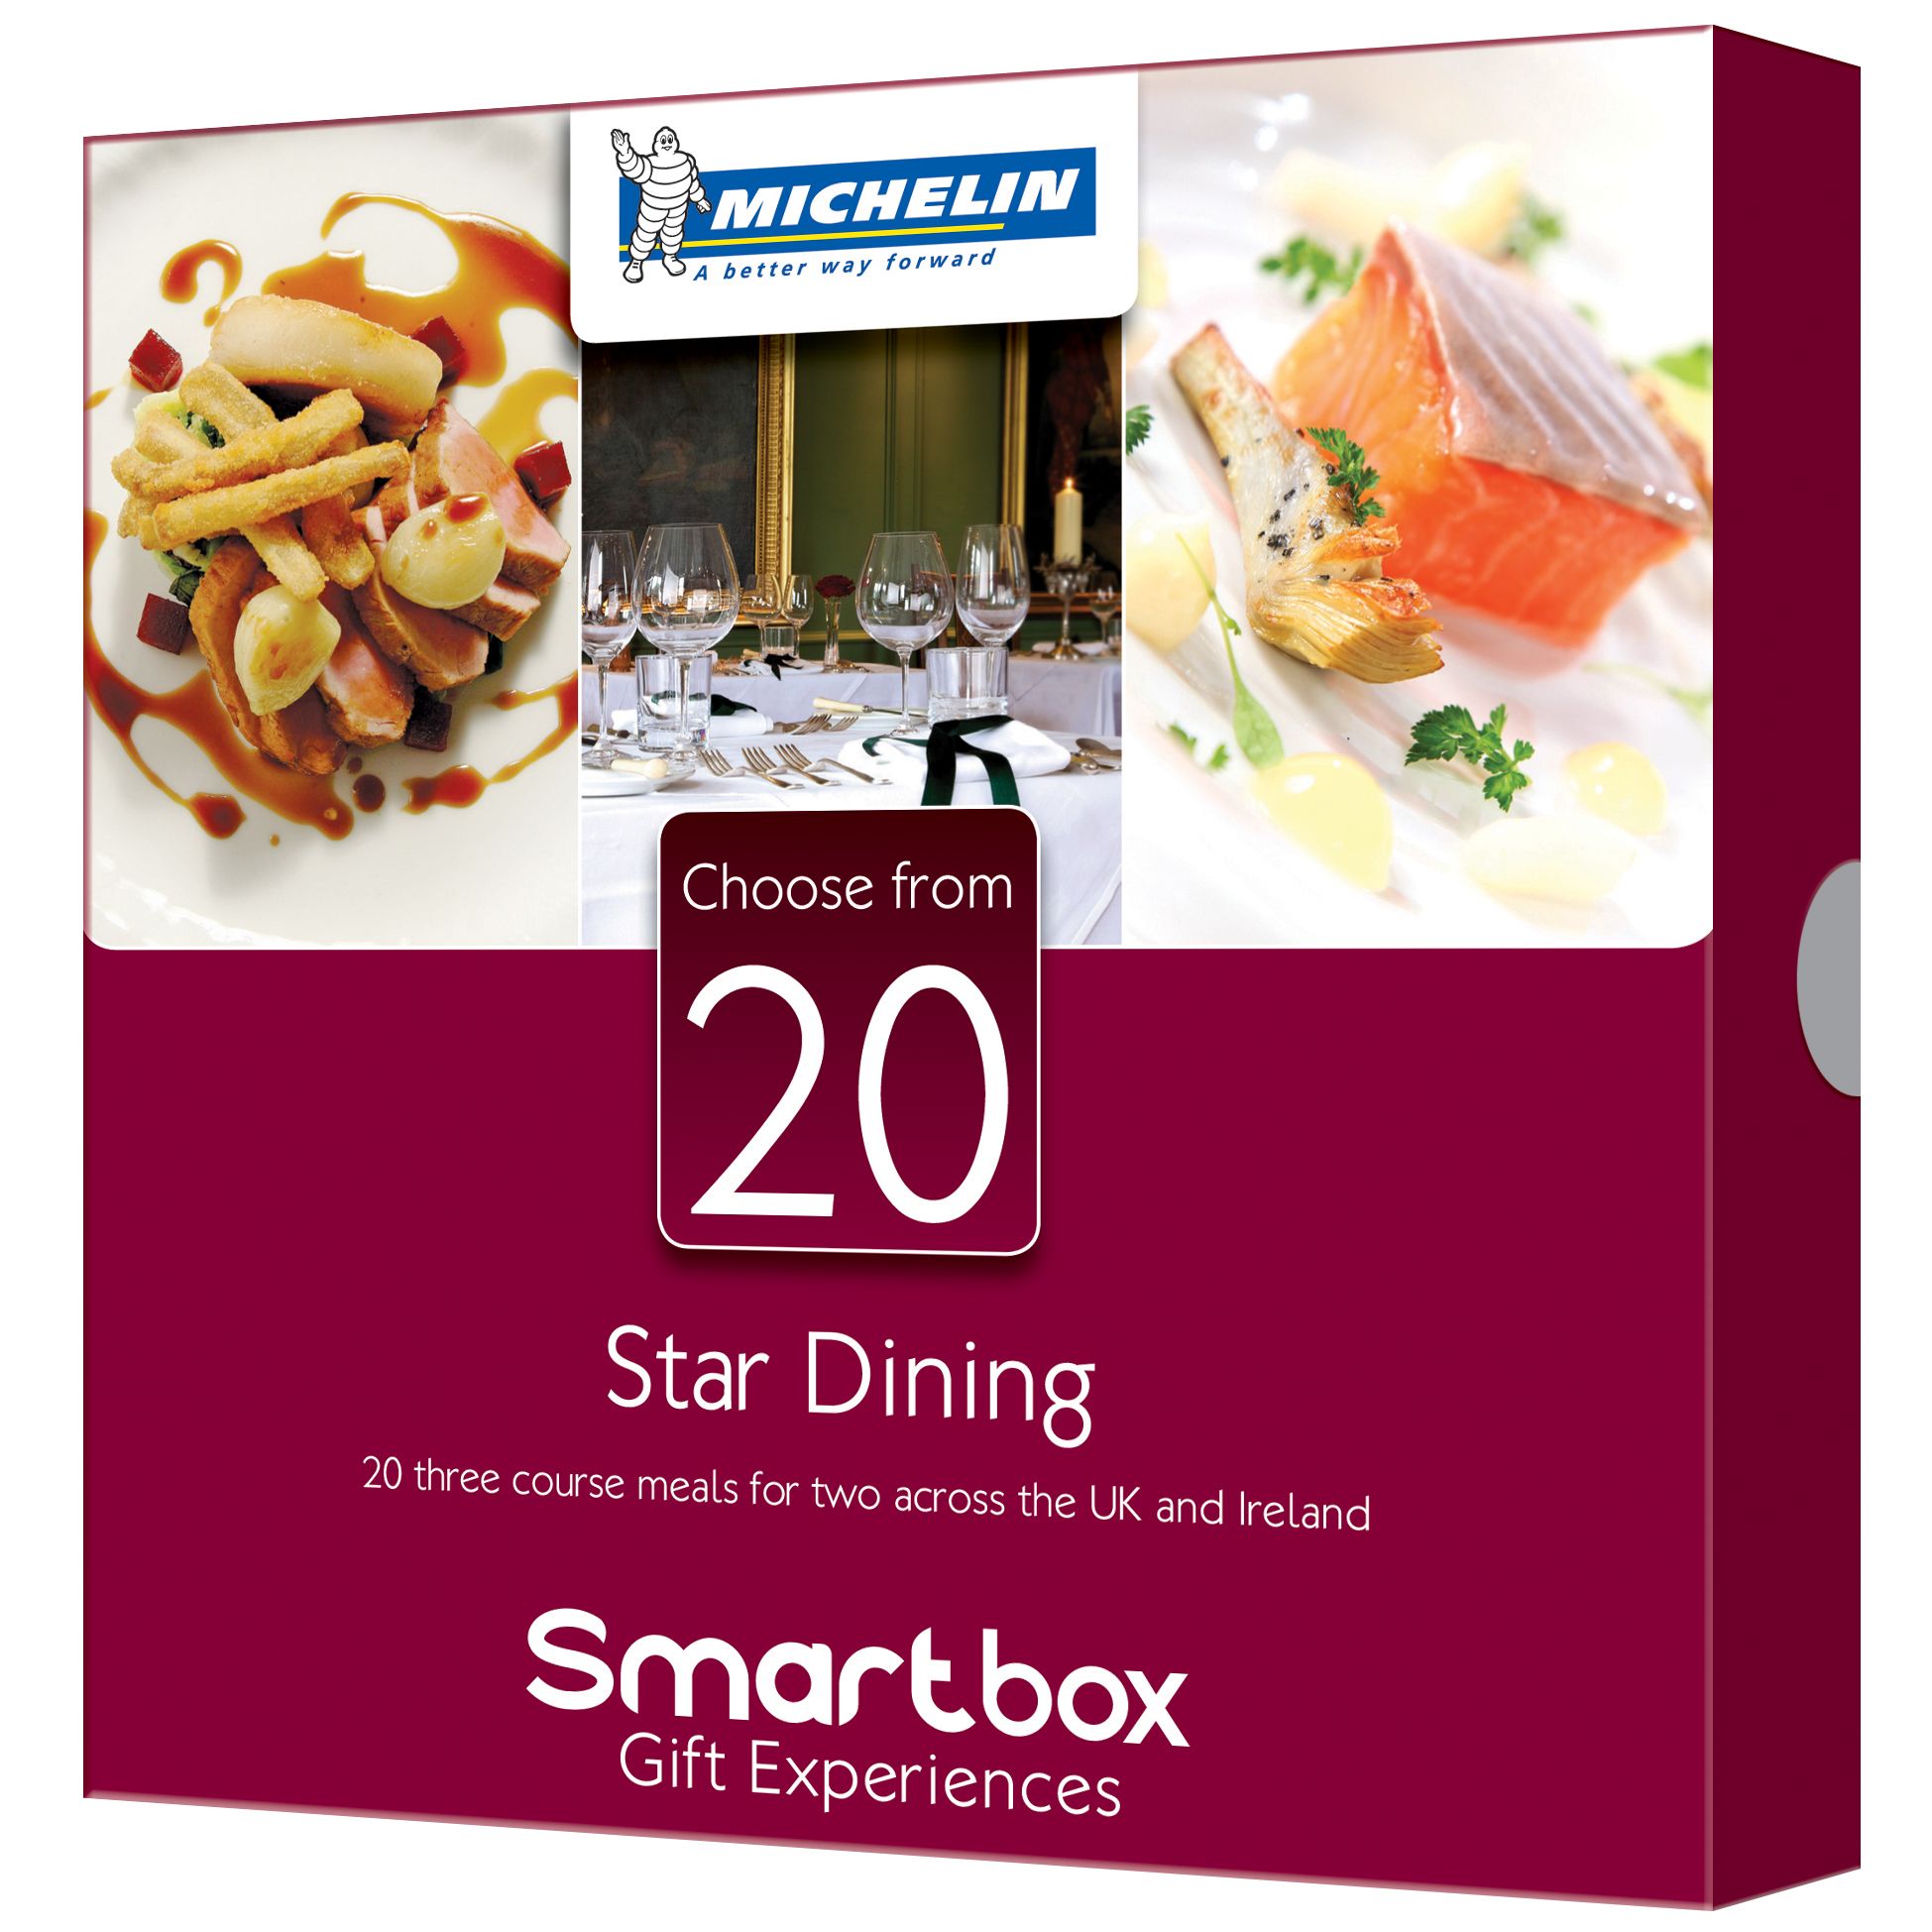 Smartbox Michelin Restaurant for 2 at John Lewis